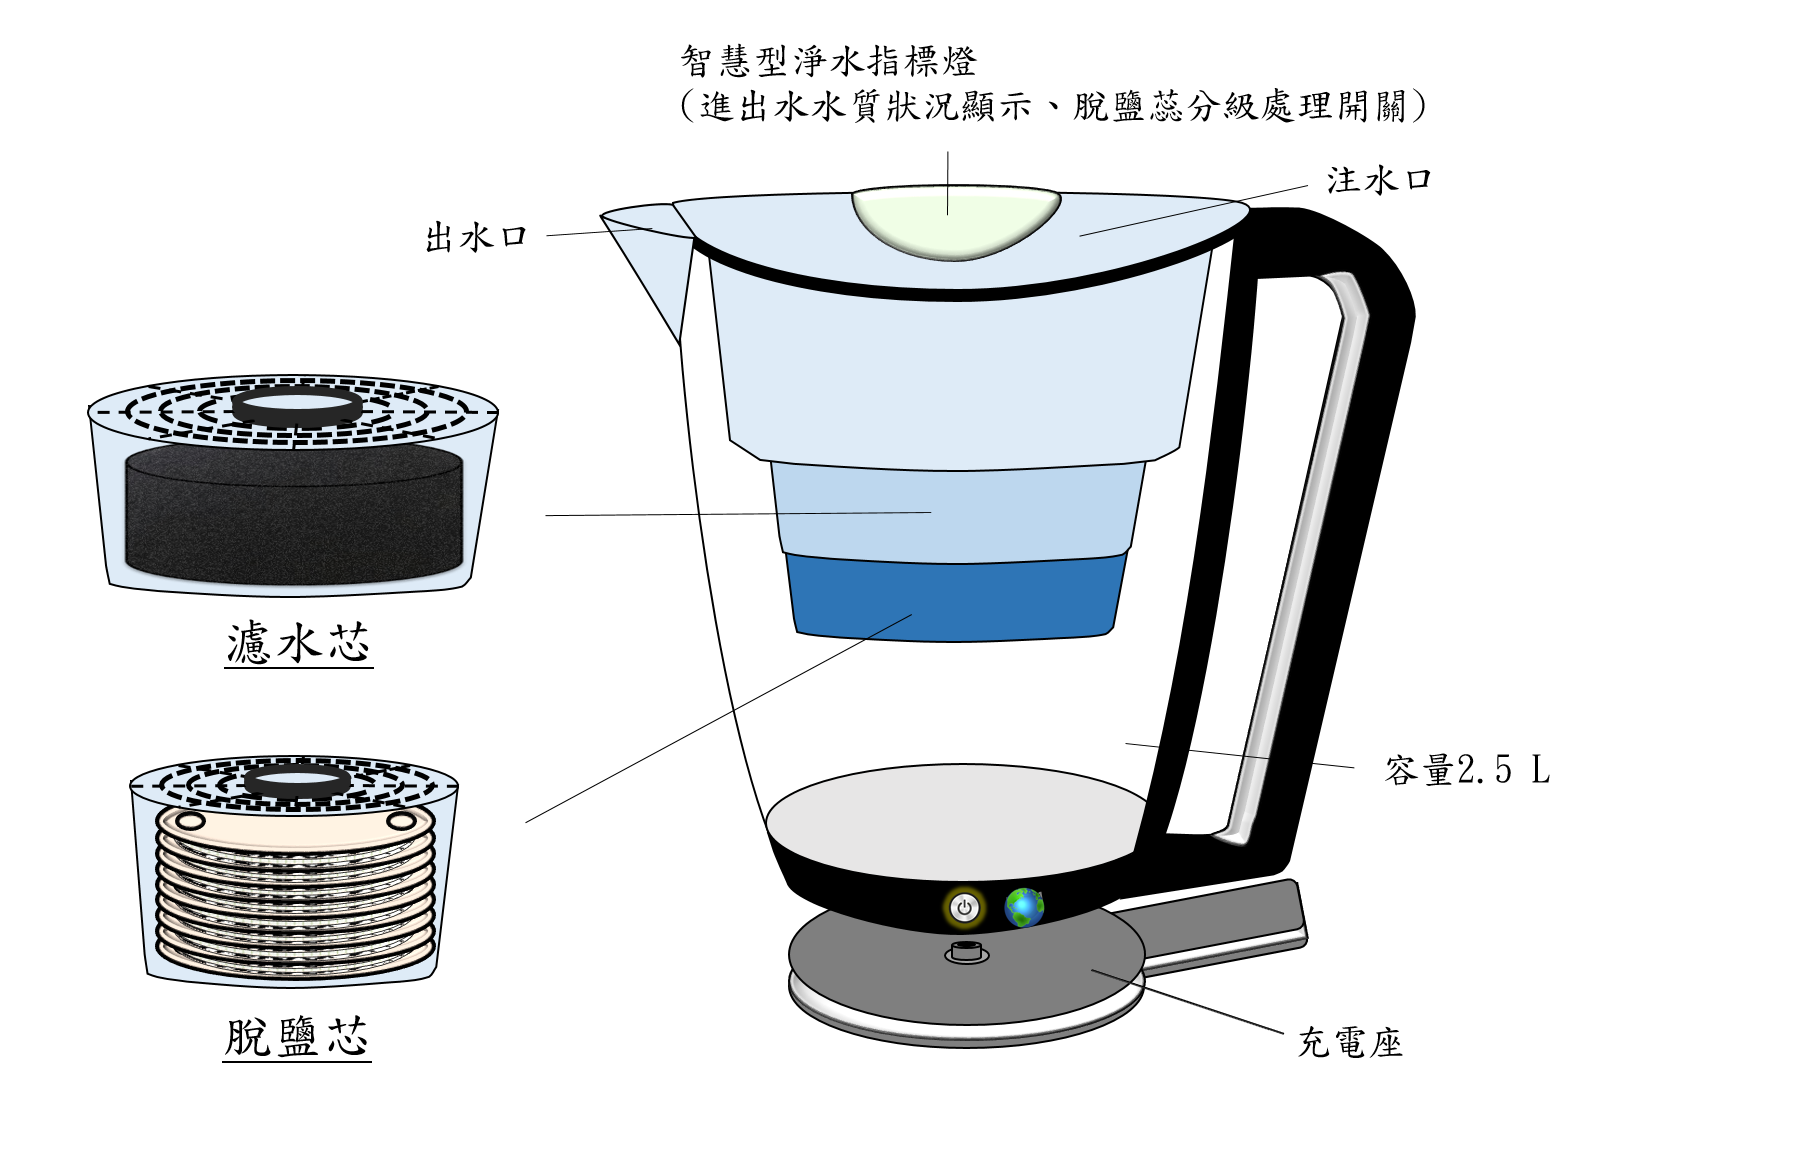 Multi-functional water softening filters